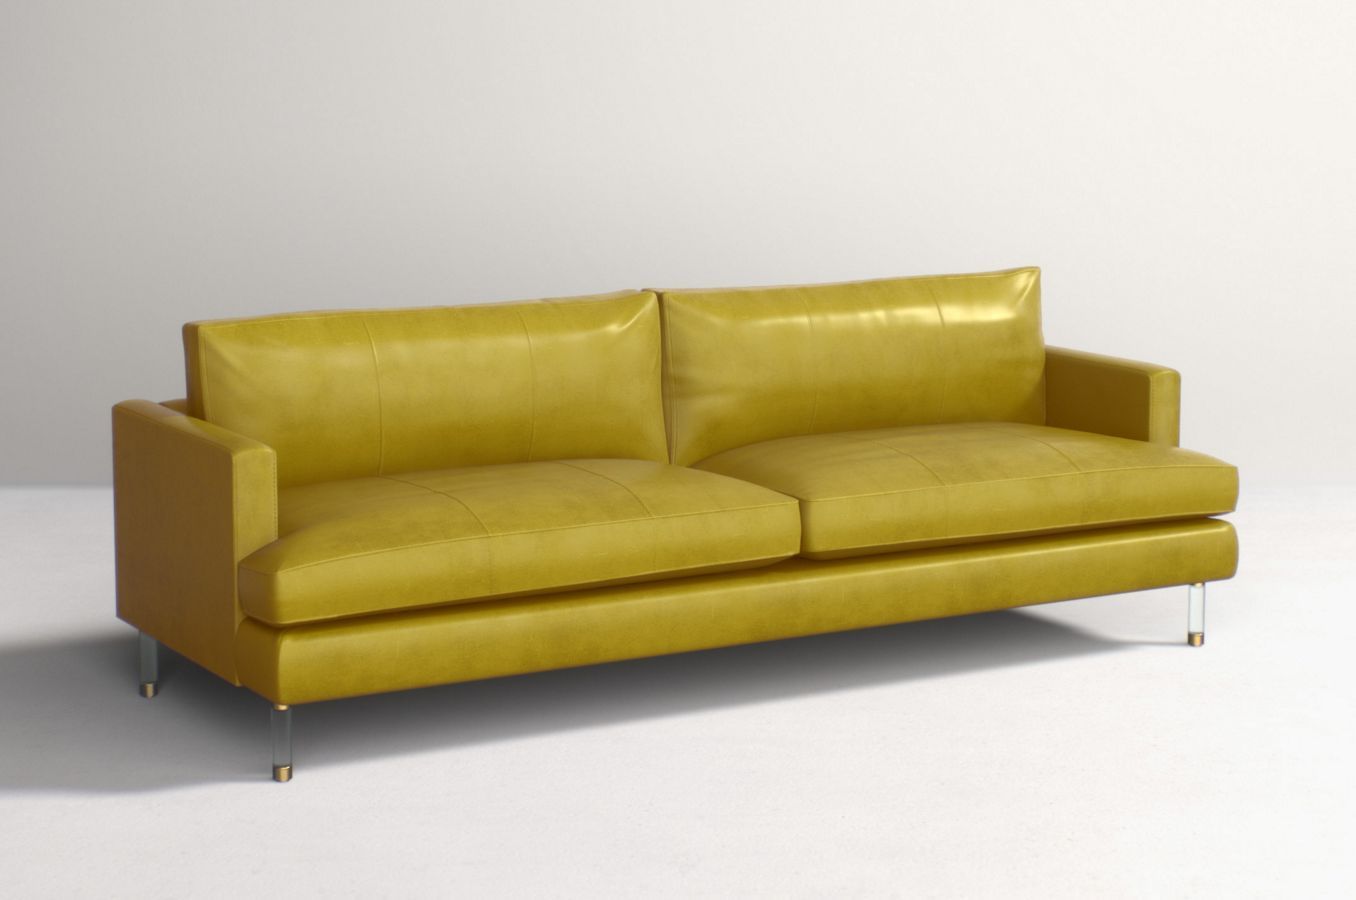 15 Best Leather Sofas To In 2020, Colorful Leather Sofas